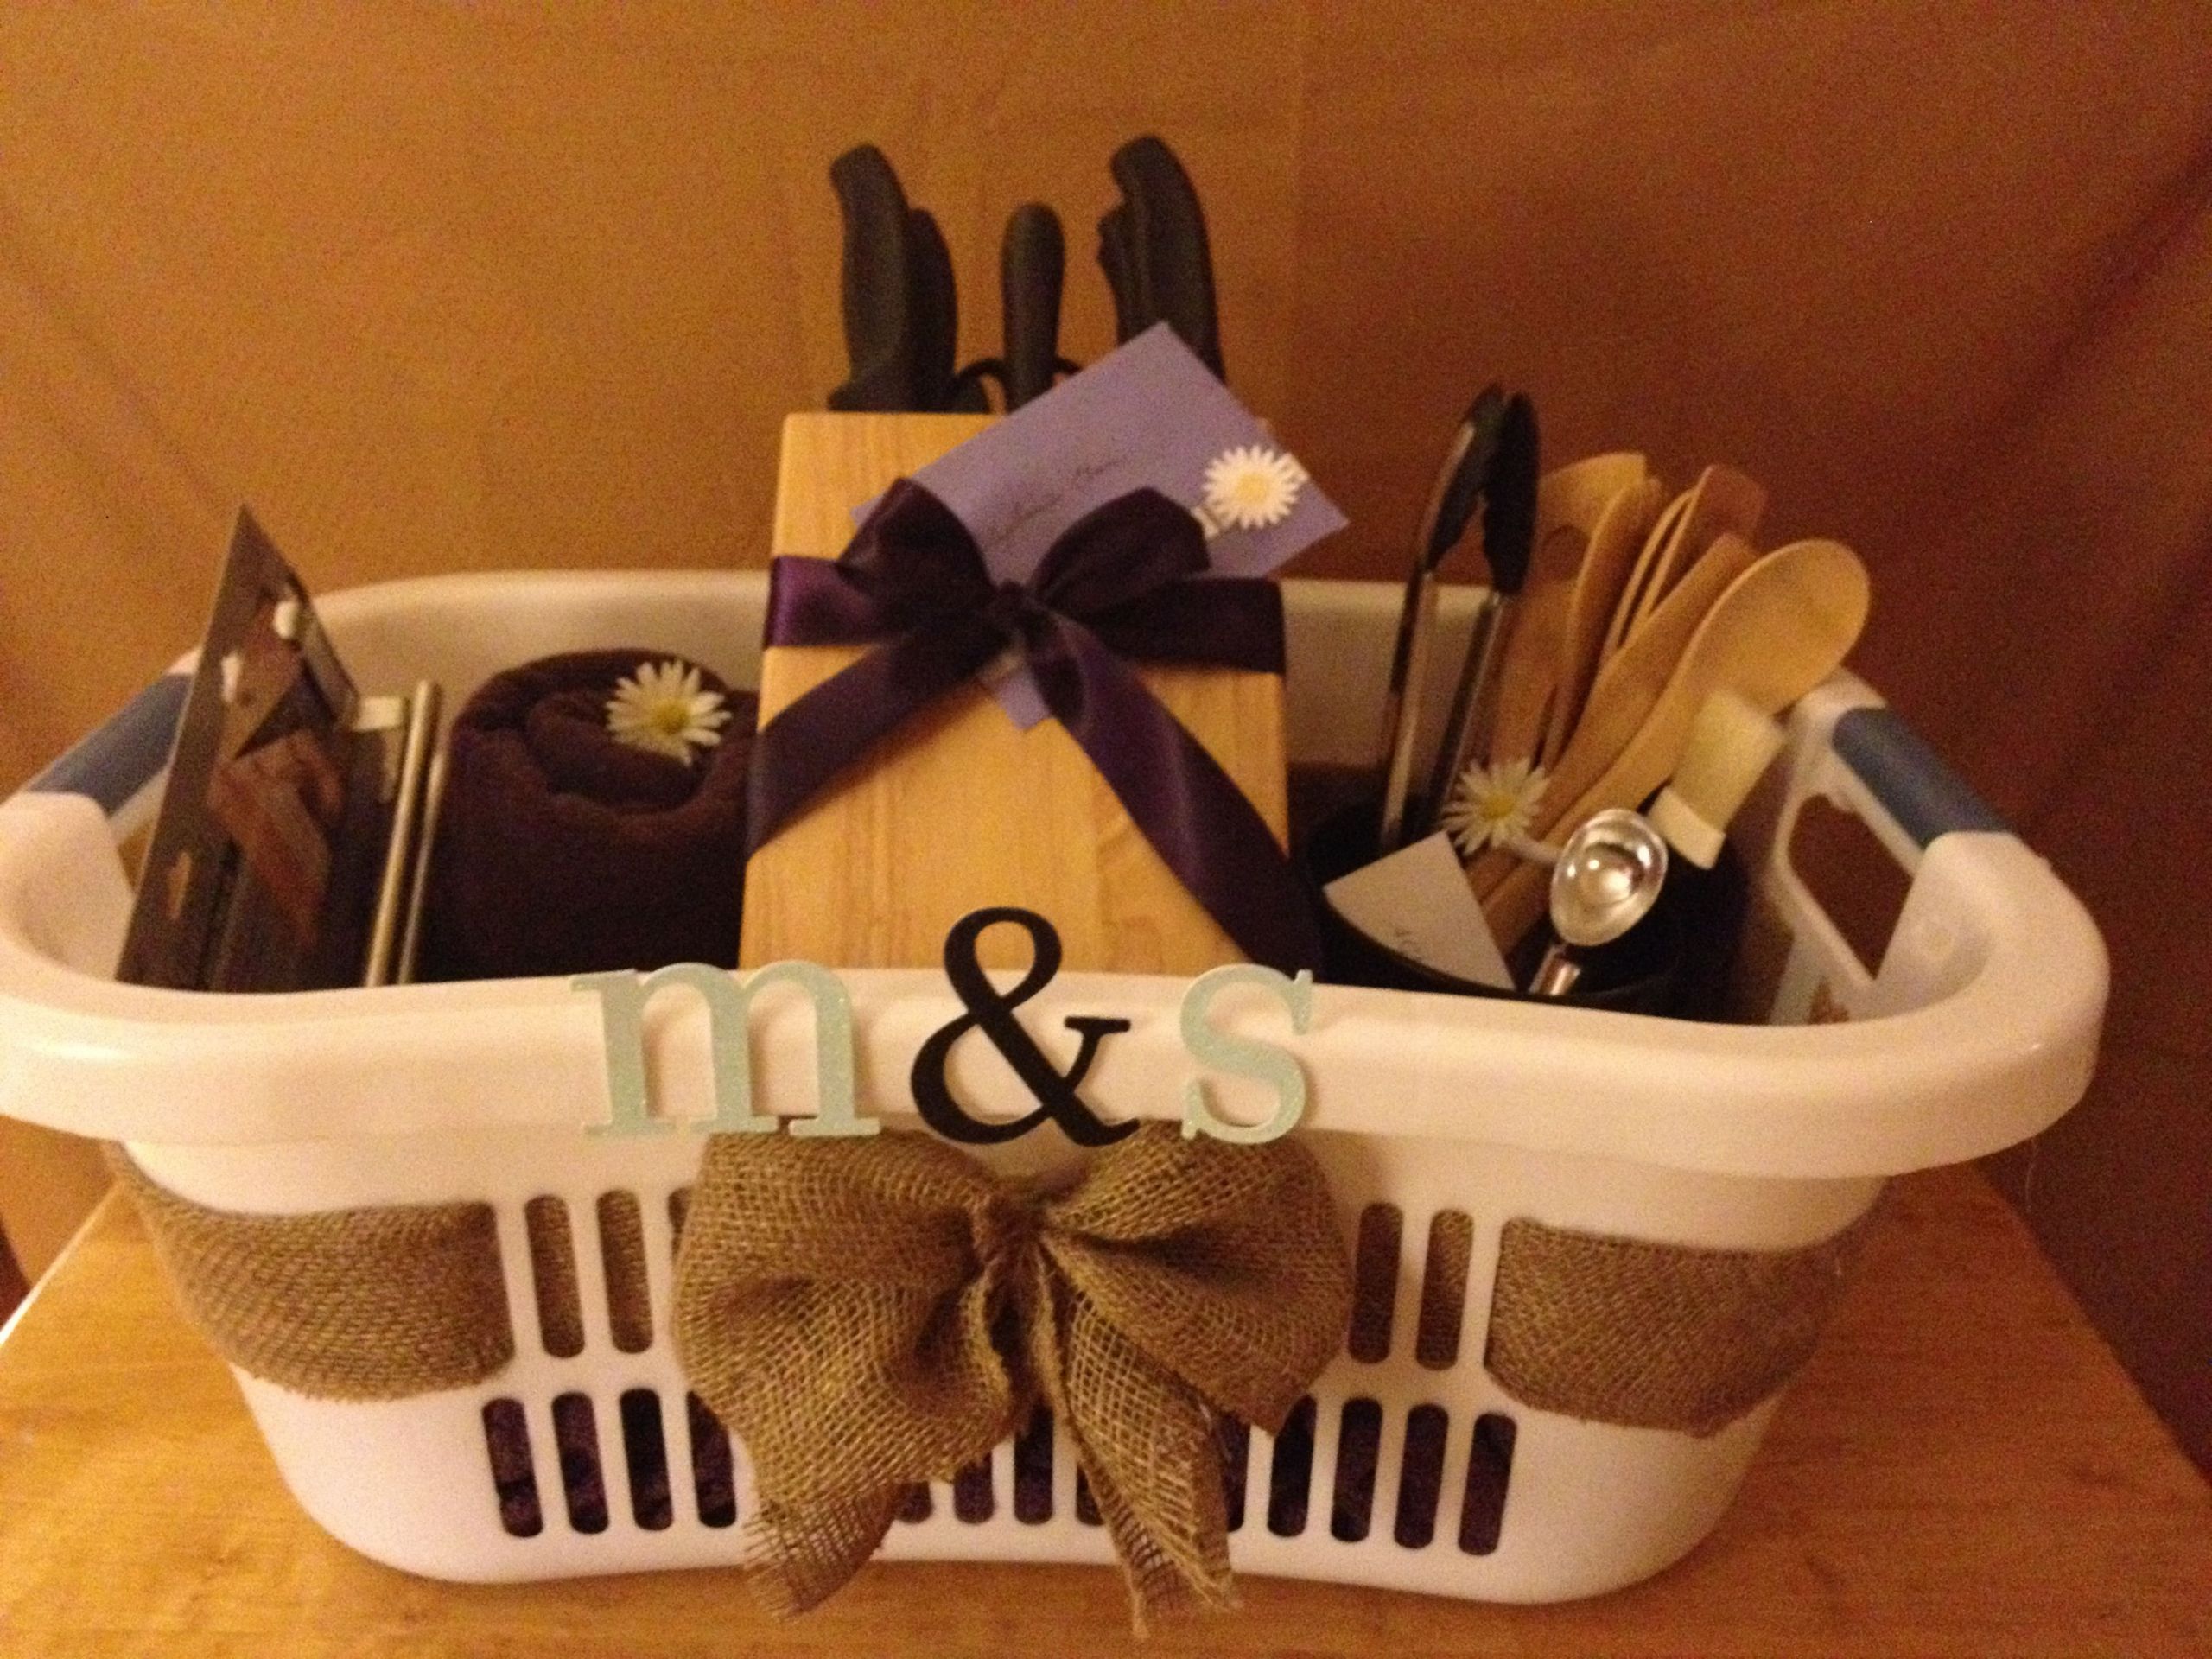 Wedding Gift Basket Ideas For Bride And Groom
 The 25 best Wedding t baskets ideas on Pinterest